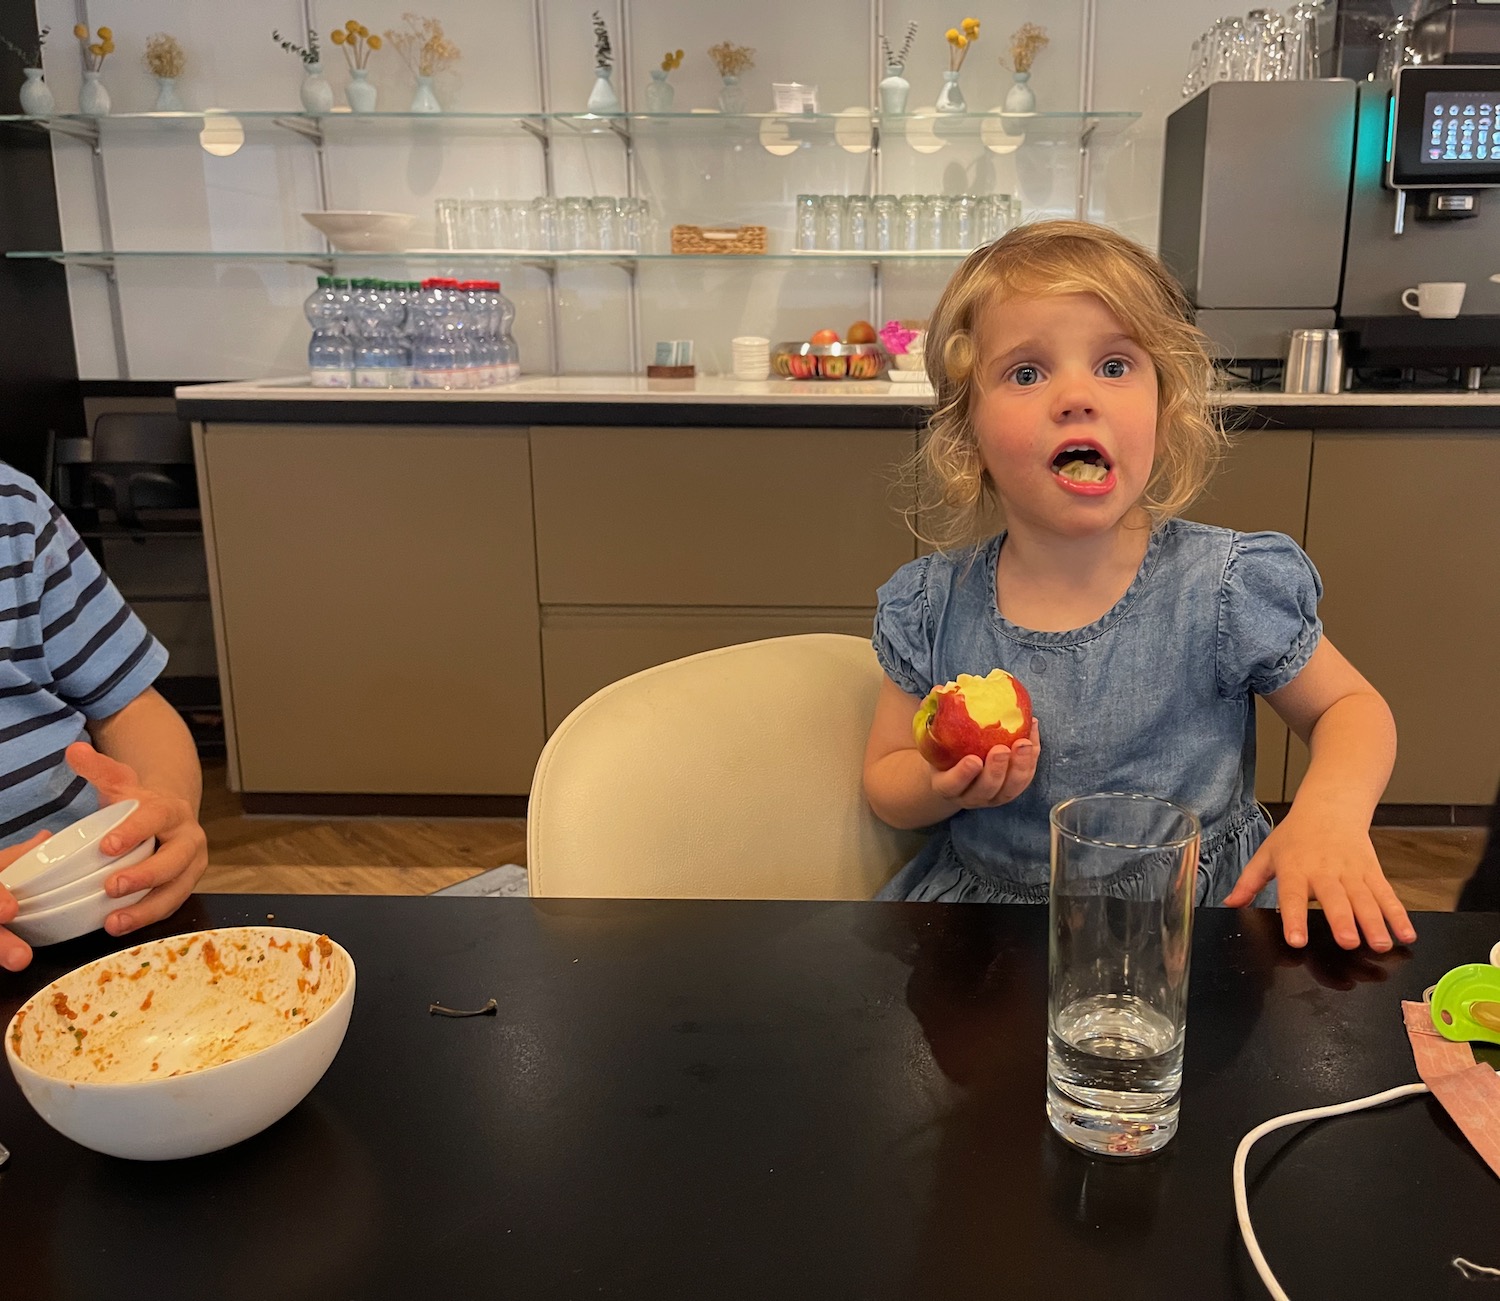 a boy and girl sitting at a table eating an apple